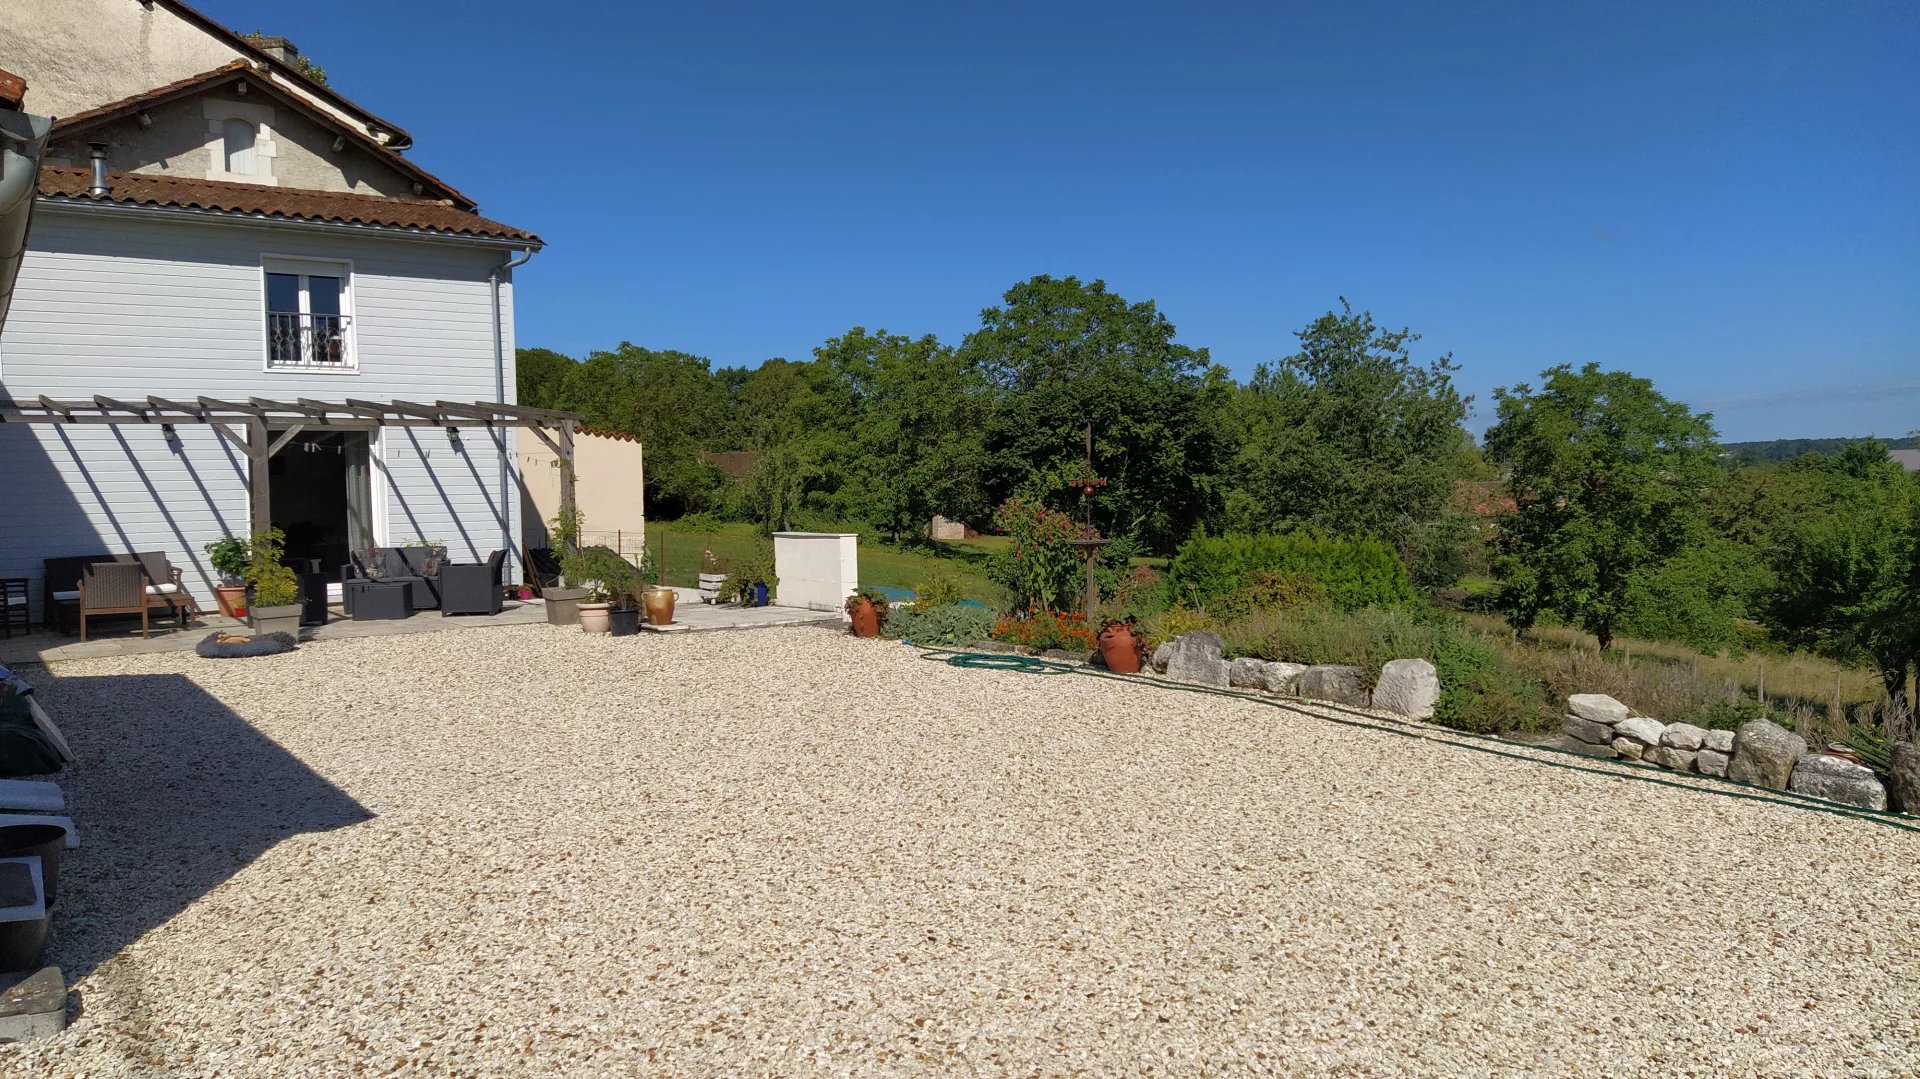 Renovated village house with pretty garden and far reaching views